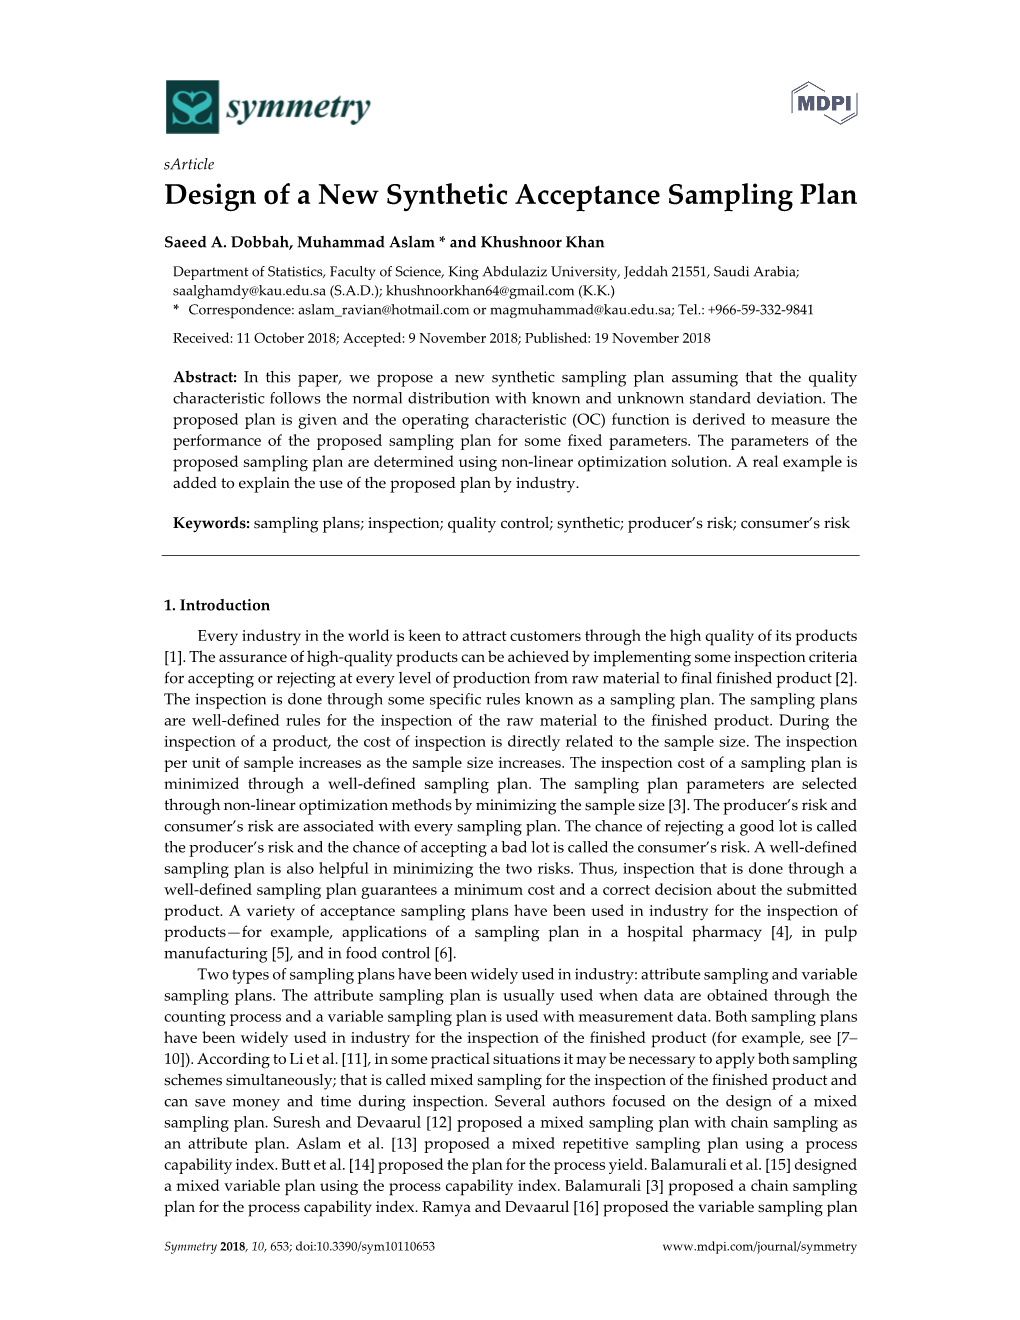 Design of a New Synthetic Acceptance Sampling Plan